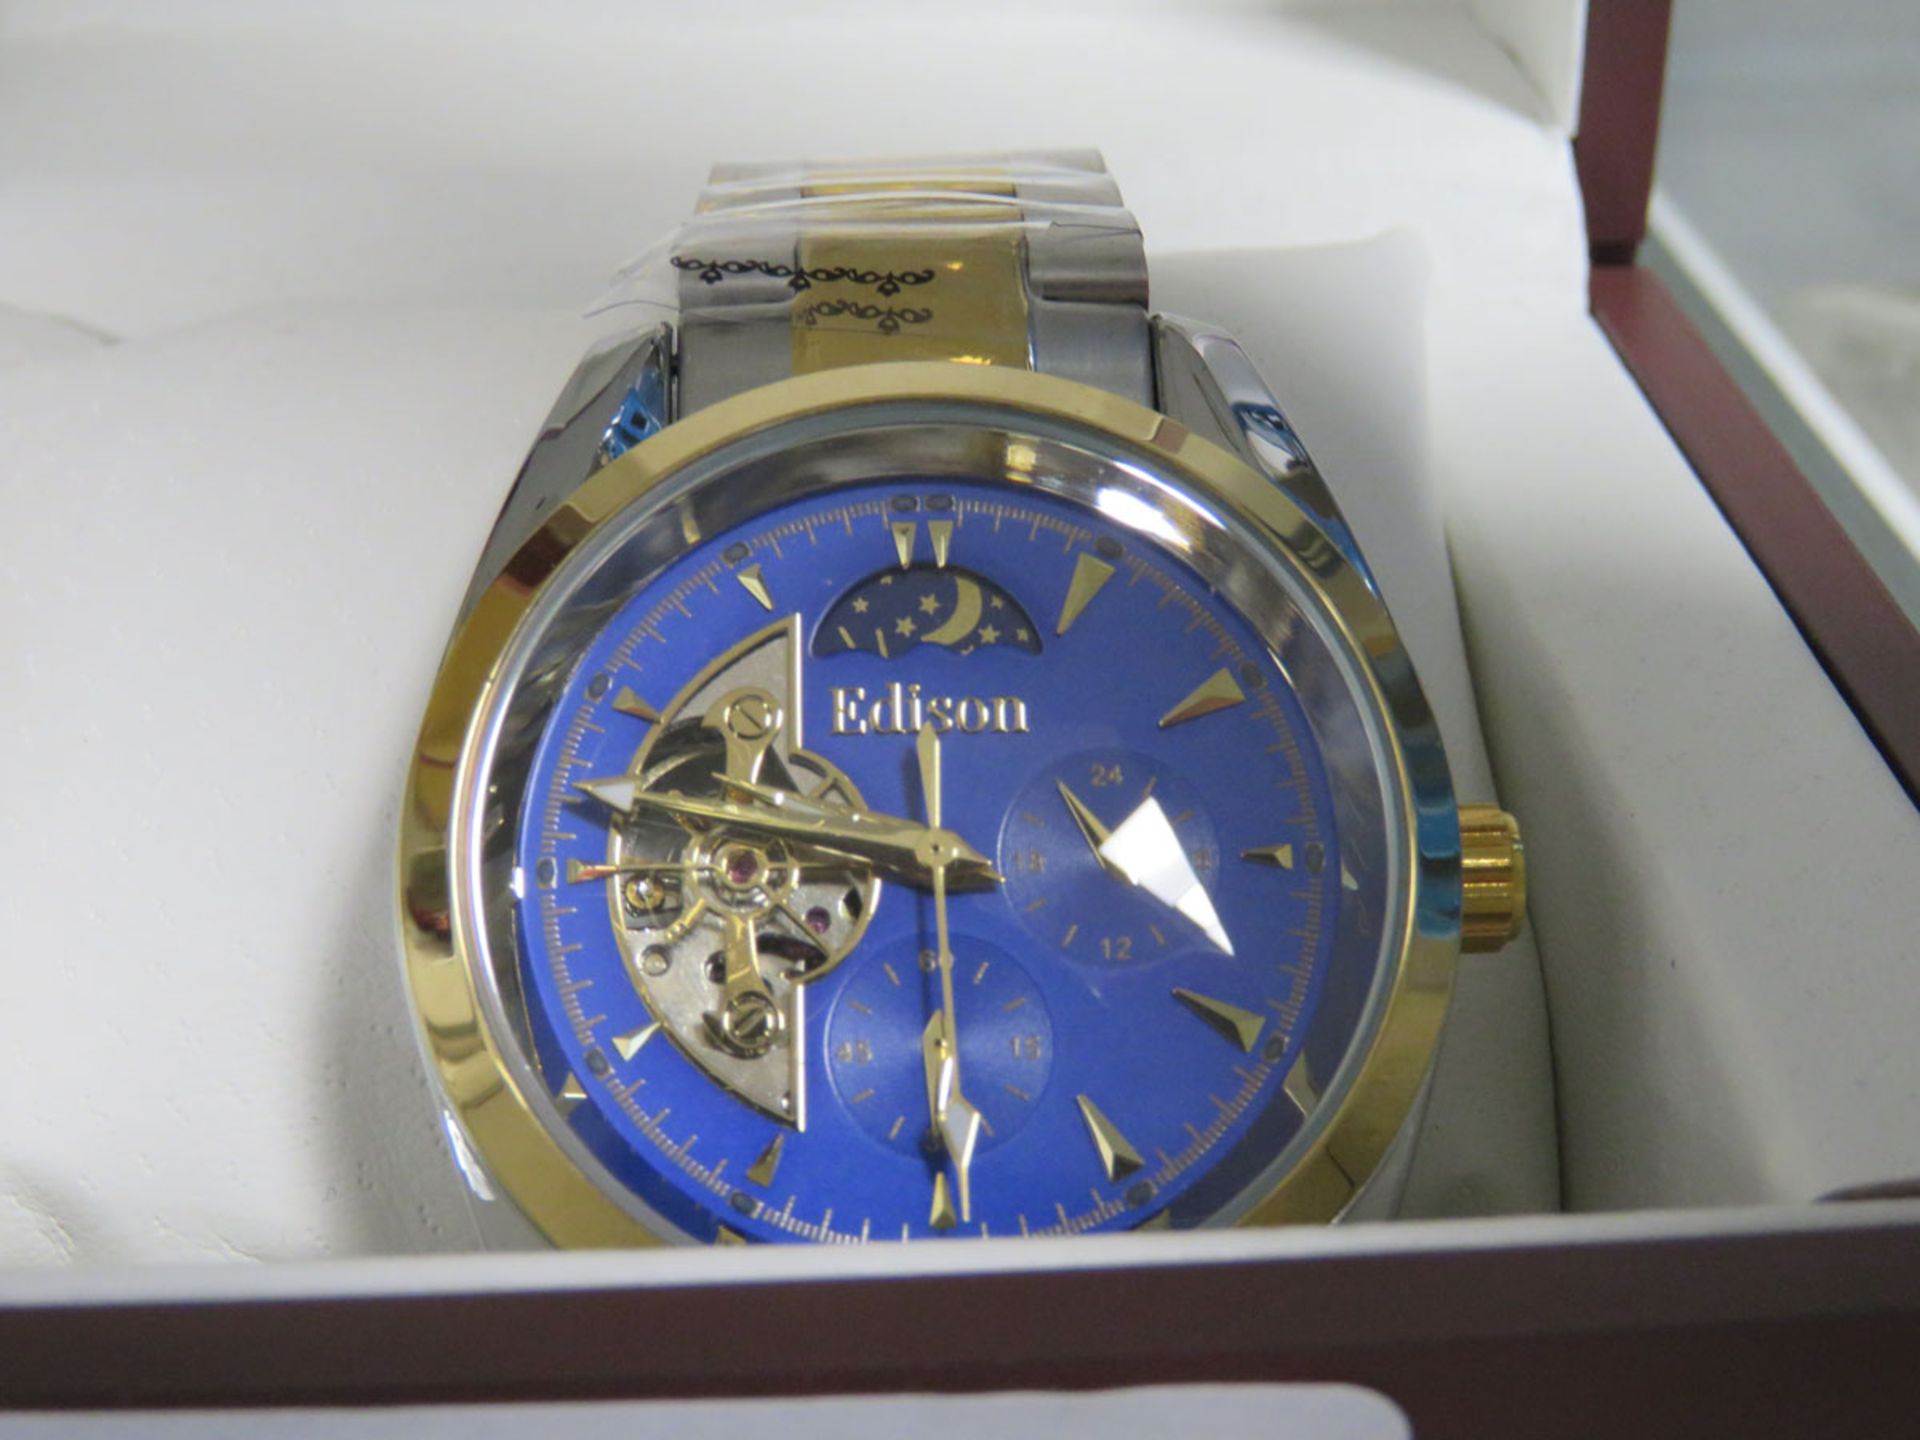 Edison stainless steel strap automatic moon phase dial watch with box - Image 2 of 2